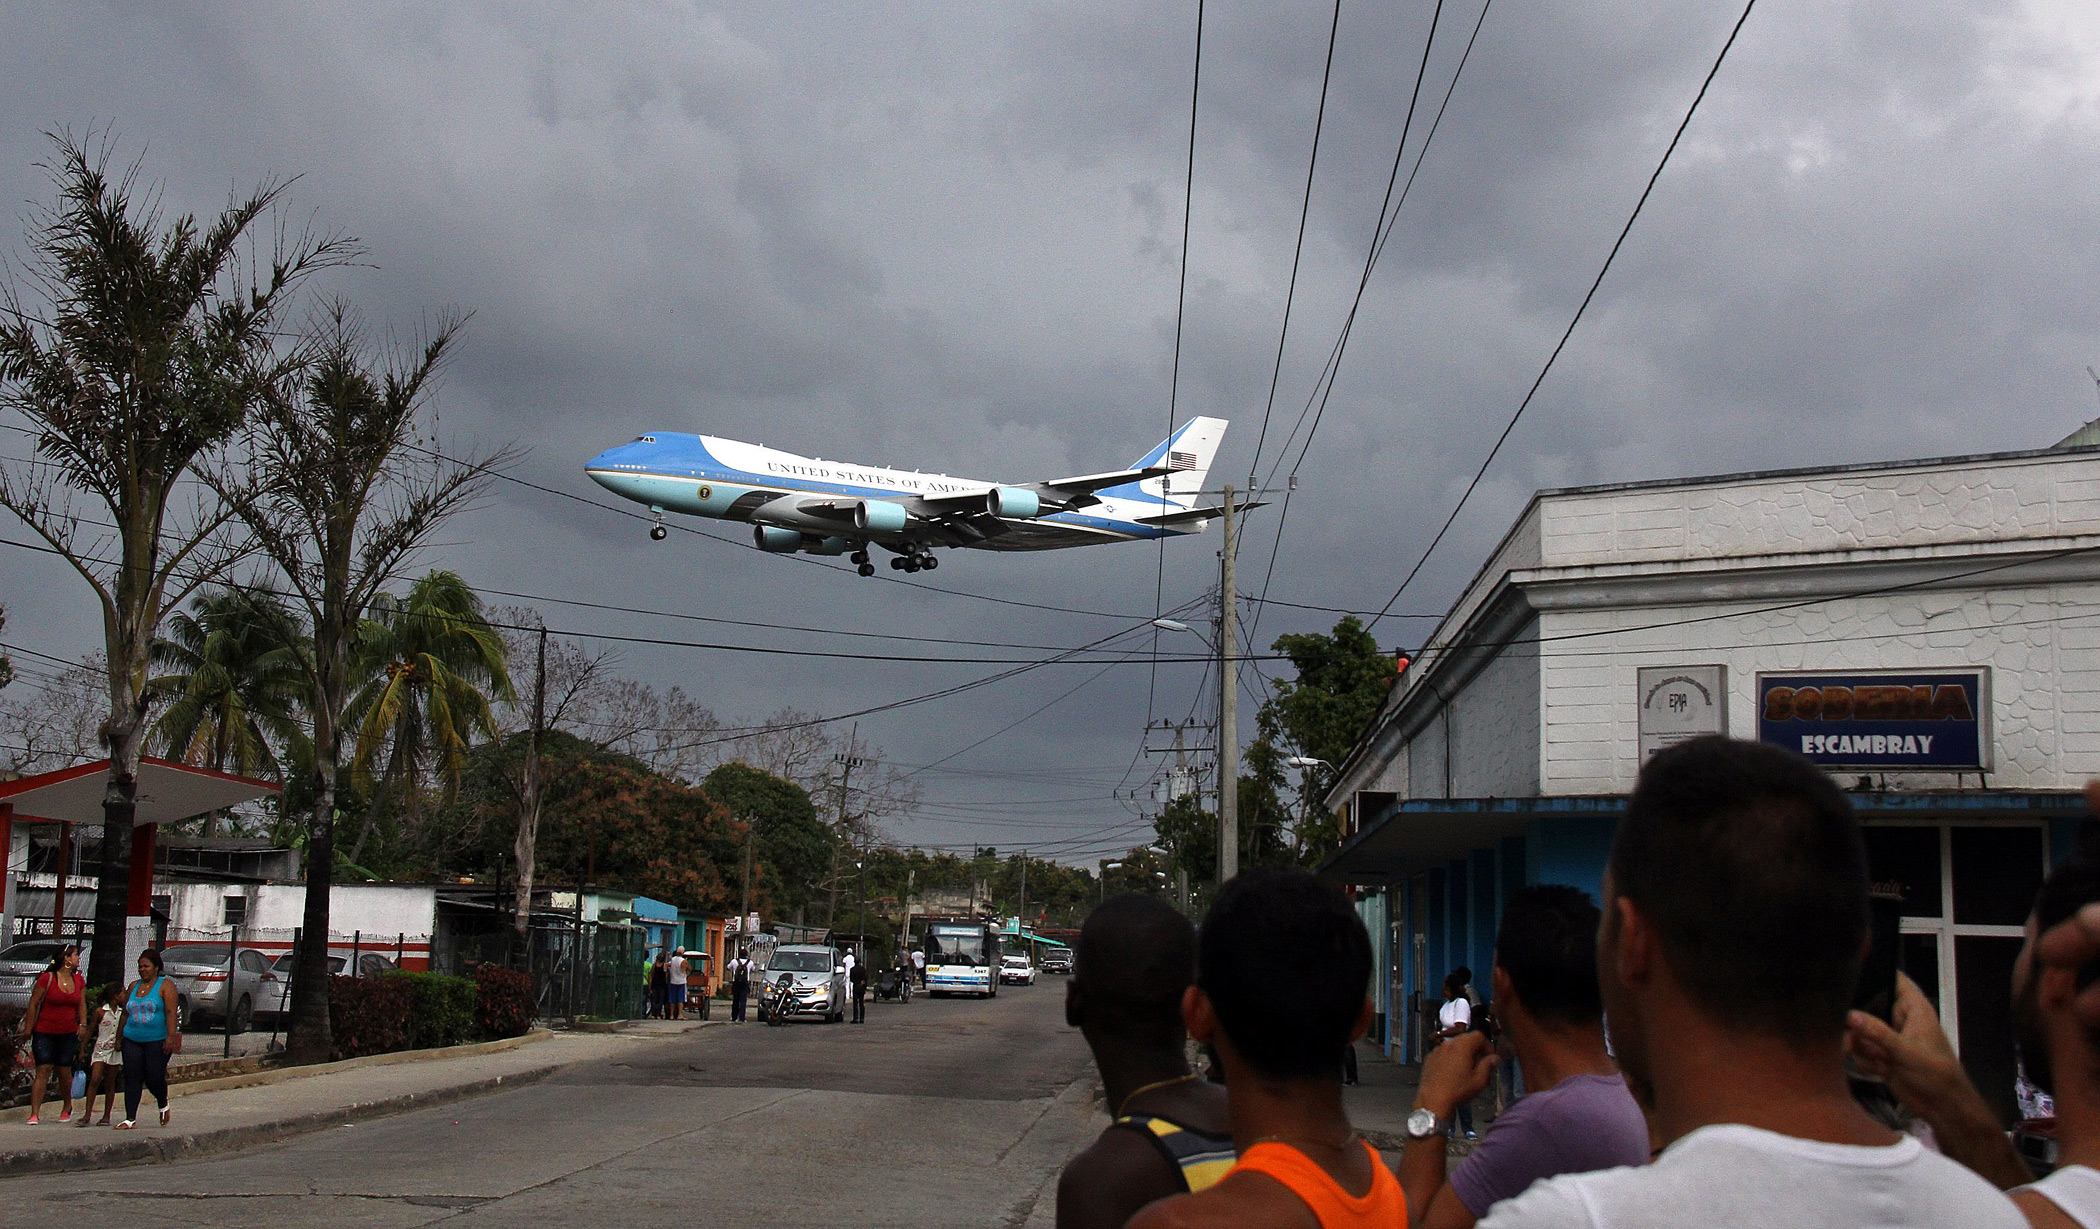 Cuban citizens wacth as Air Force One lands at Jose Marti Airport in Havana on March 20, 2016.